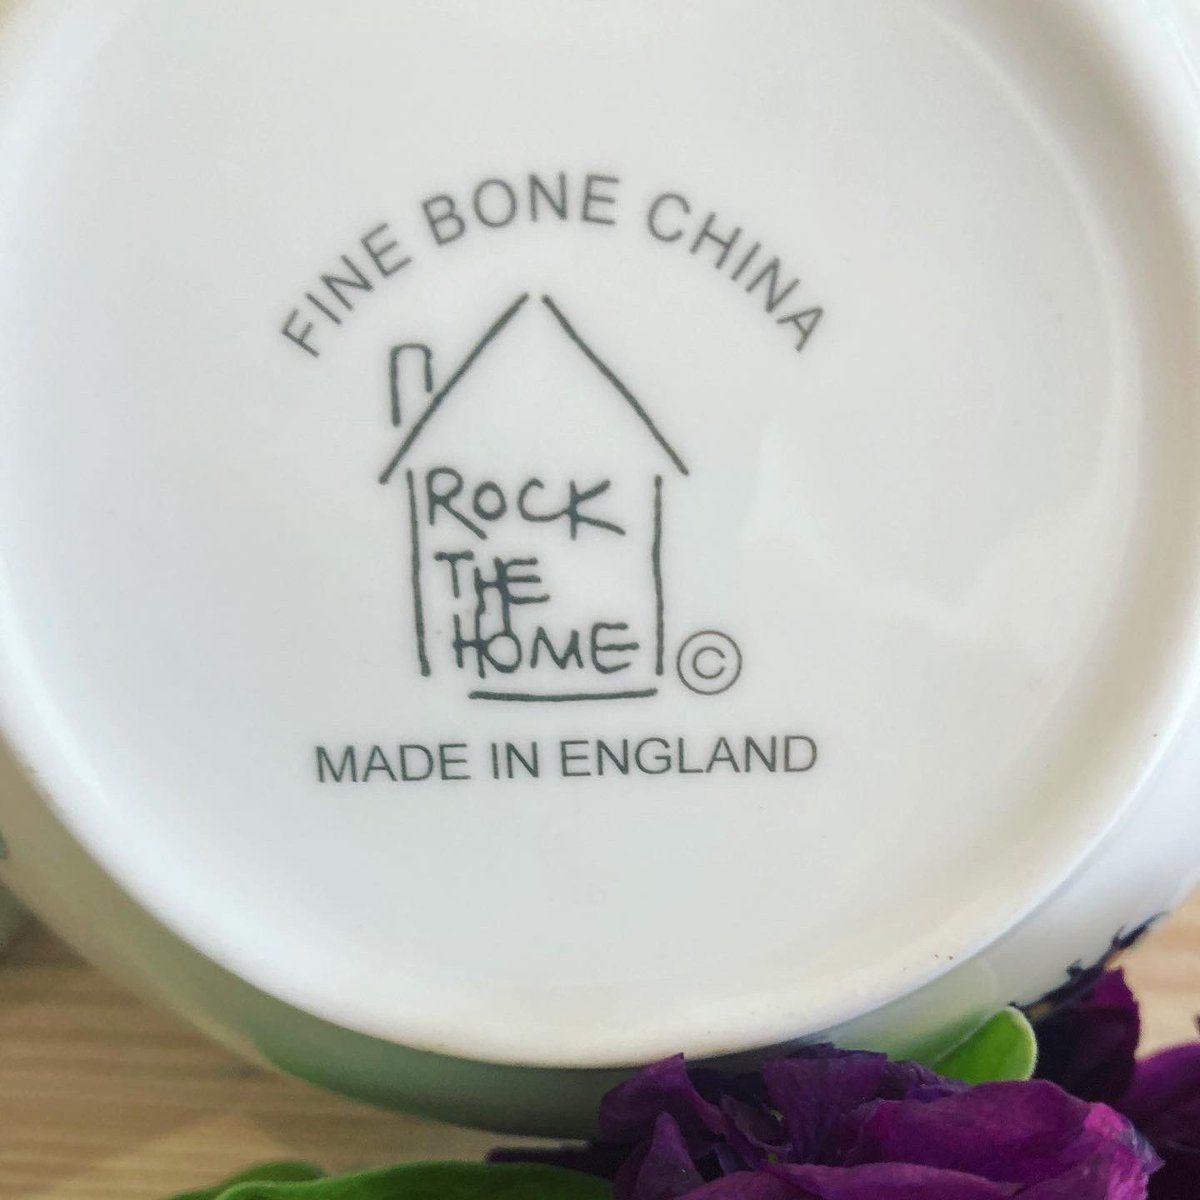 Dishwasher & microwave safe, made & #handdecorated in #England. Various designs! Support British 🇬🇧 support small business. @rockthehome Please follow! Fab new website (link in bio)
#rockthehome #teapot #mug #madeinuk #smallbusiness #newhome #gift #birthdayforhim #birthdayforher